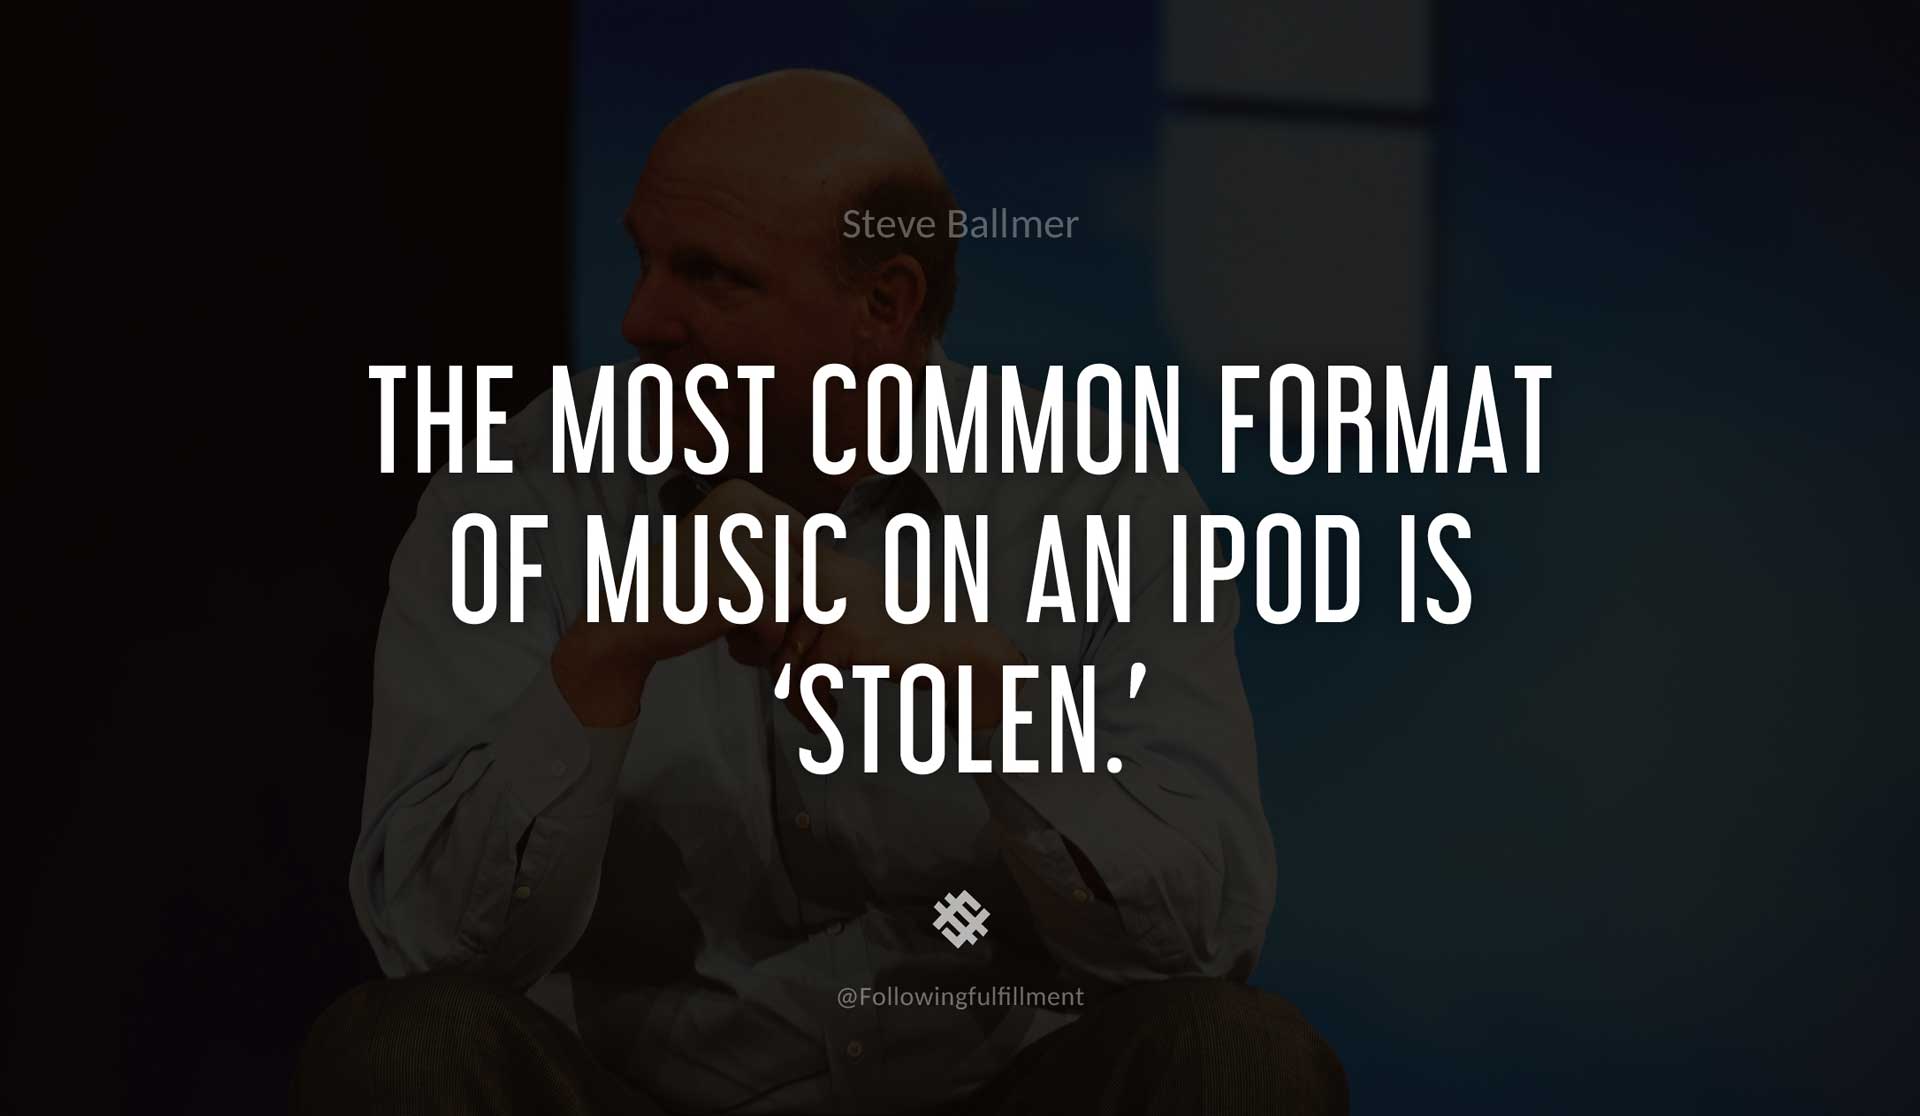 The-most-common-format-of-music-on-an-iPod-is-'stolen.'-STEVE-BALLMER-Quote.jpg